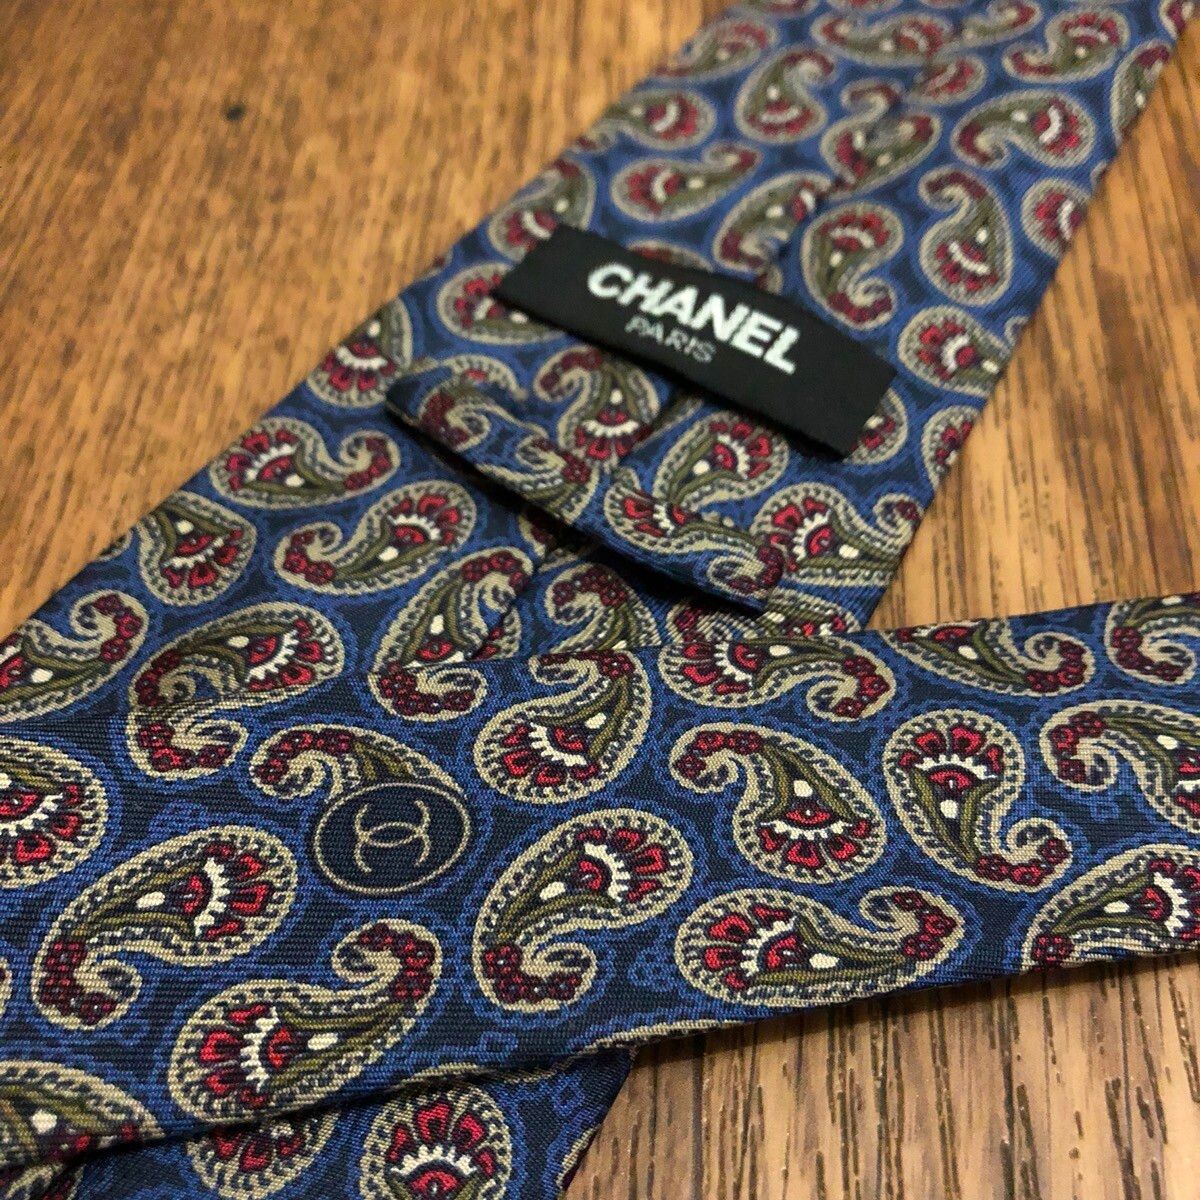 Chanel Chanel Very Rare Vintage 90s Silk Tie Logo Size ONE SIZE - 2 Preview